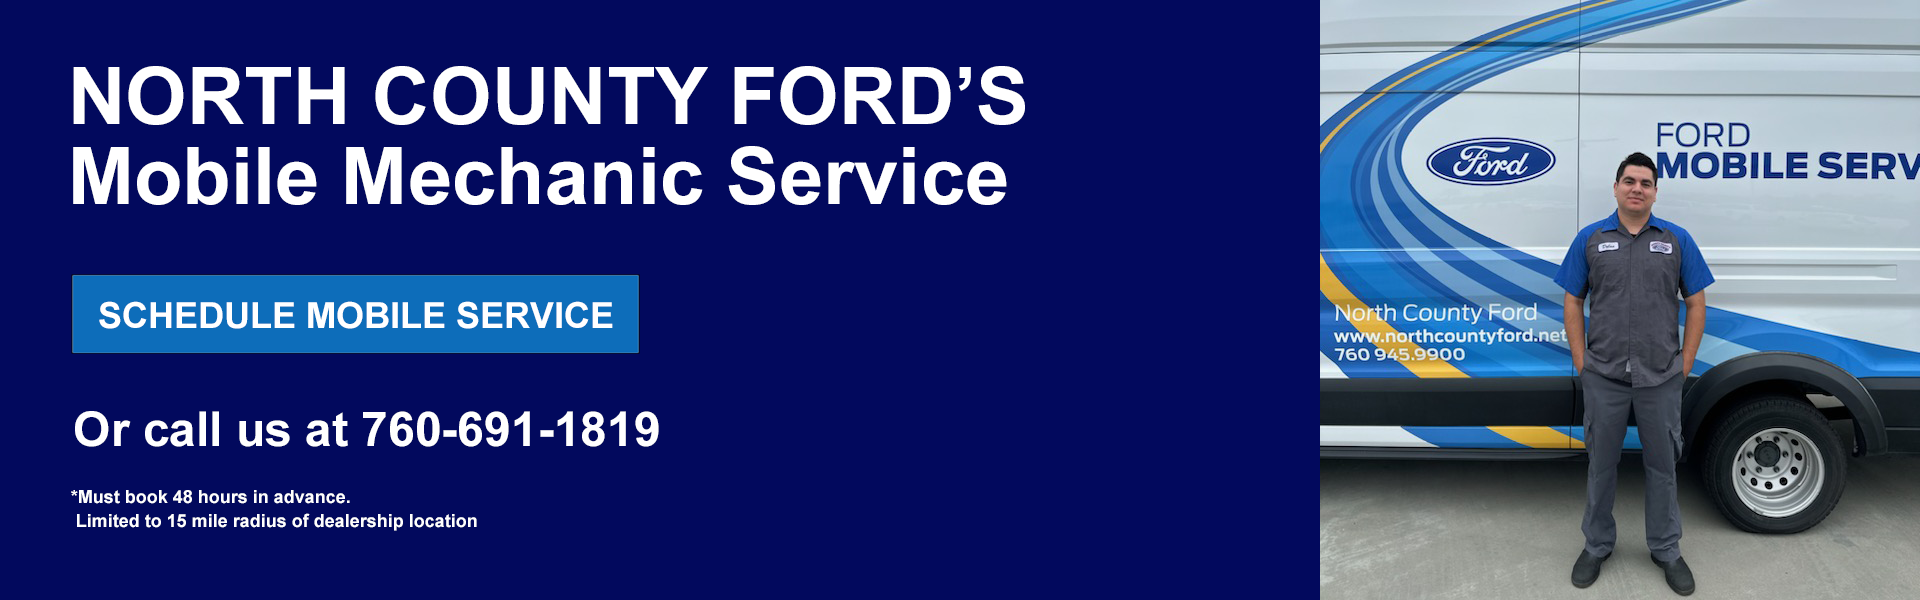 North County Ford's Mobile Mechanic Service! Try it for it's convenience, love it for its simplicity.